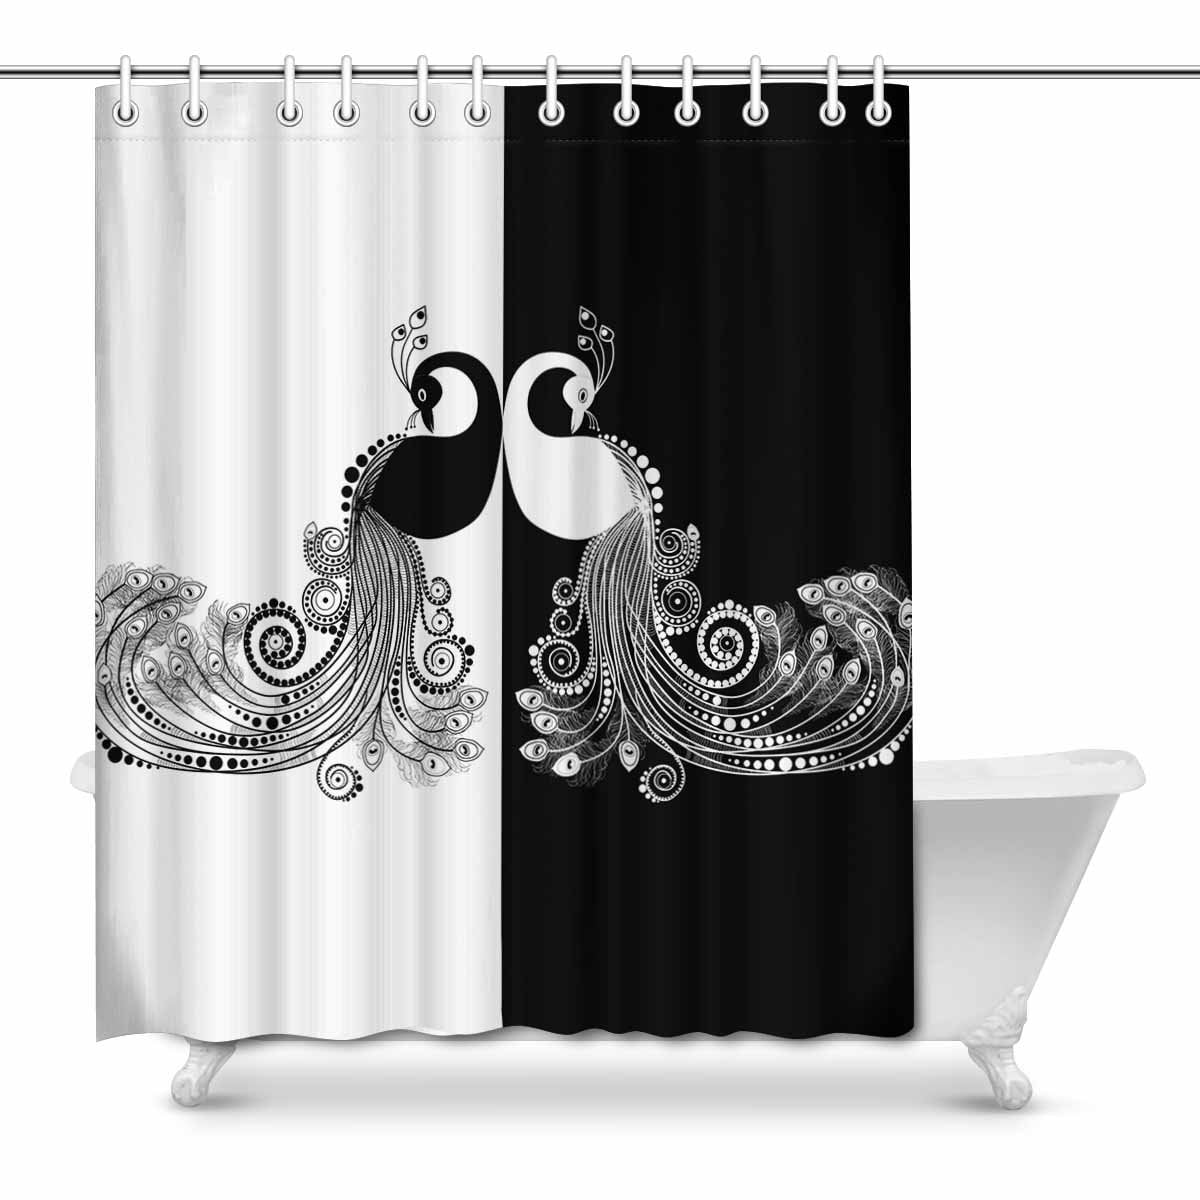 PEACOCK Fabric Curtains Bathroom Shower Curtain Polyester Sheer Accessories Mat 